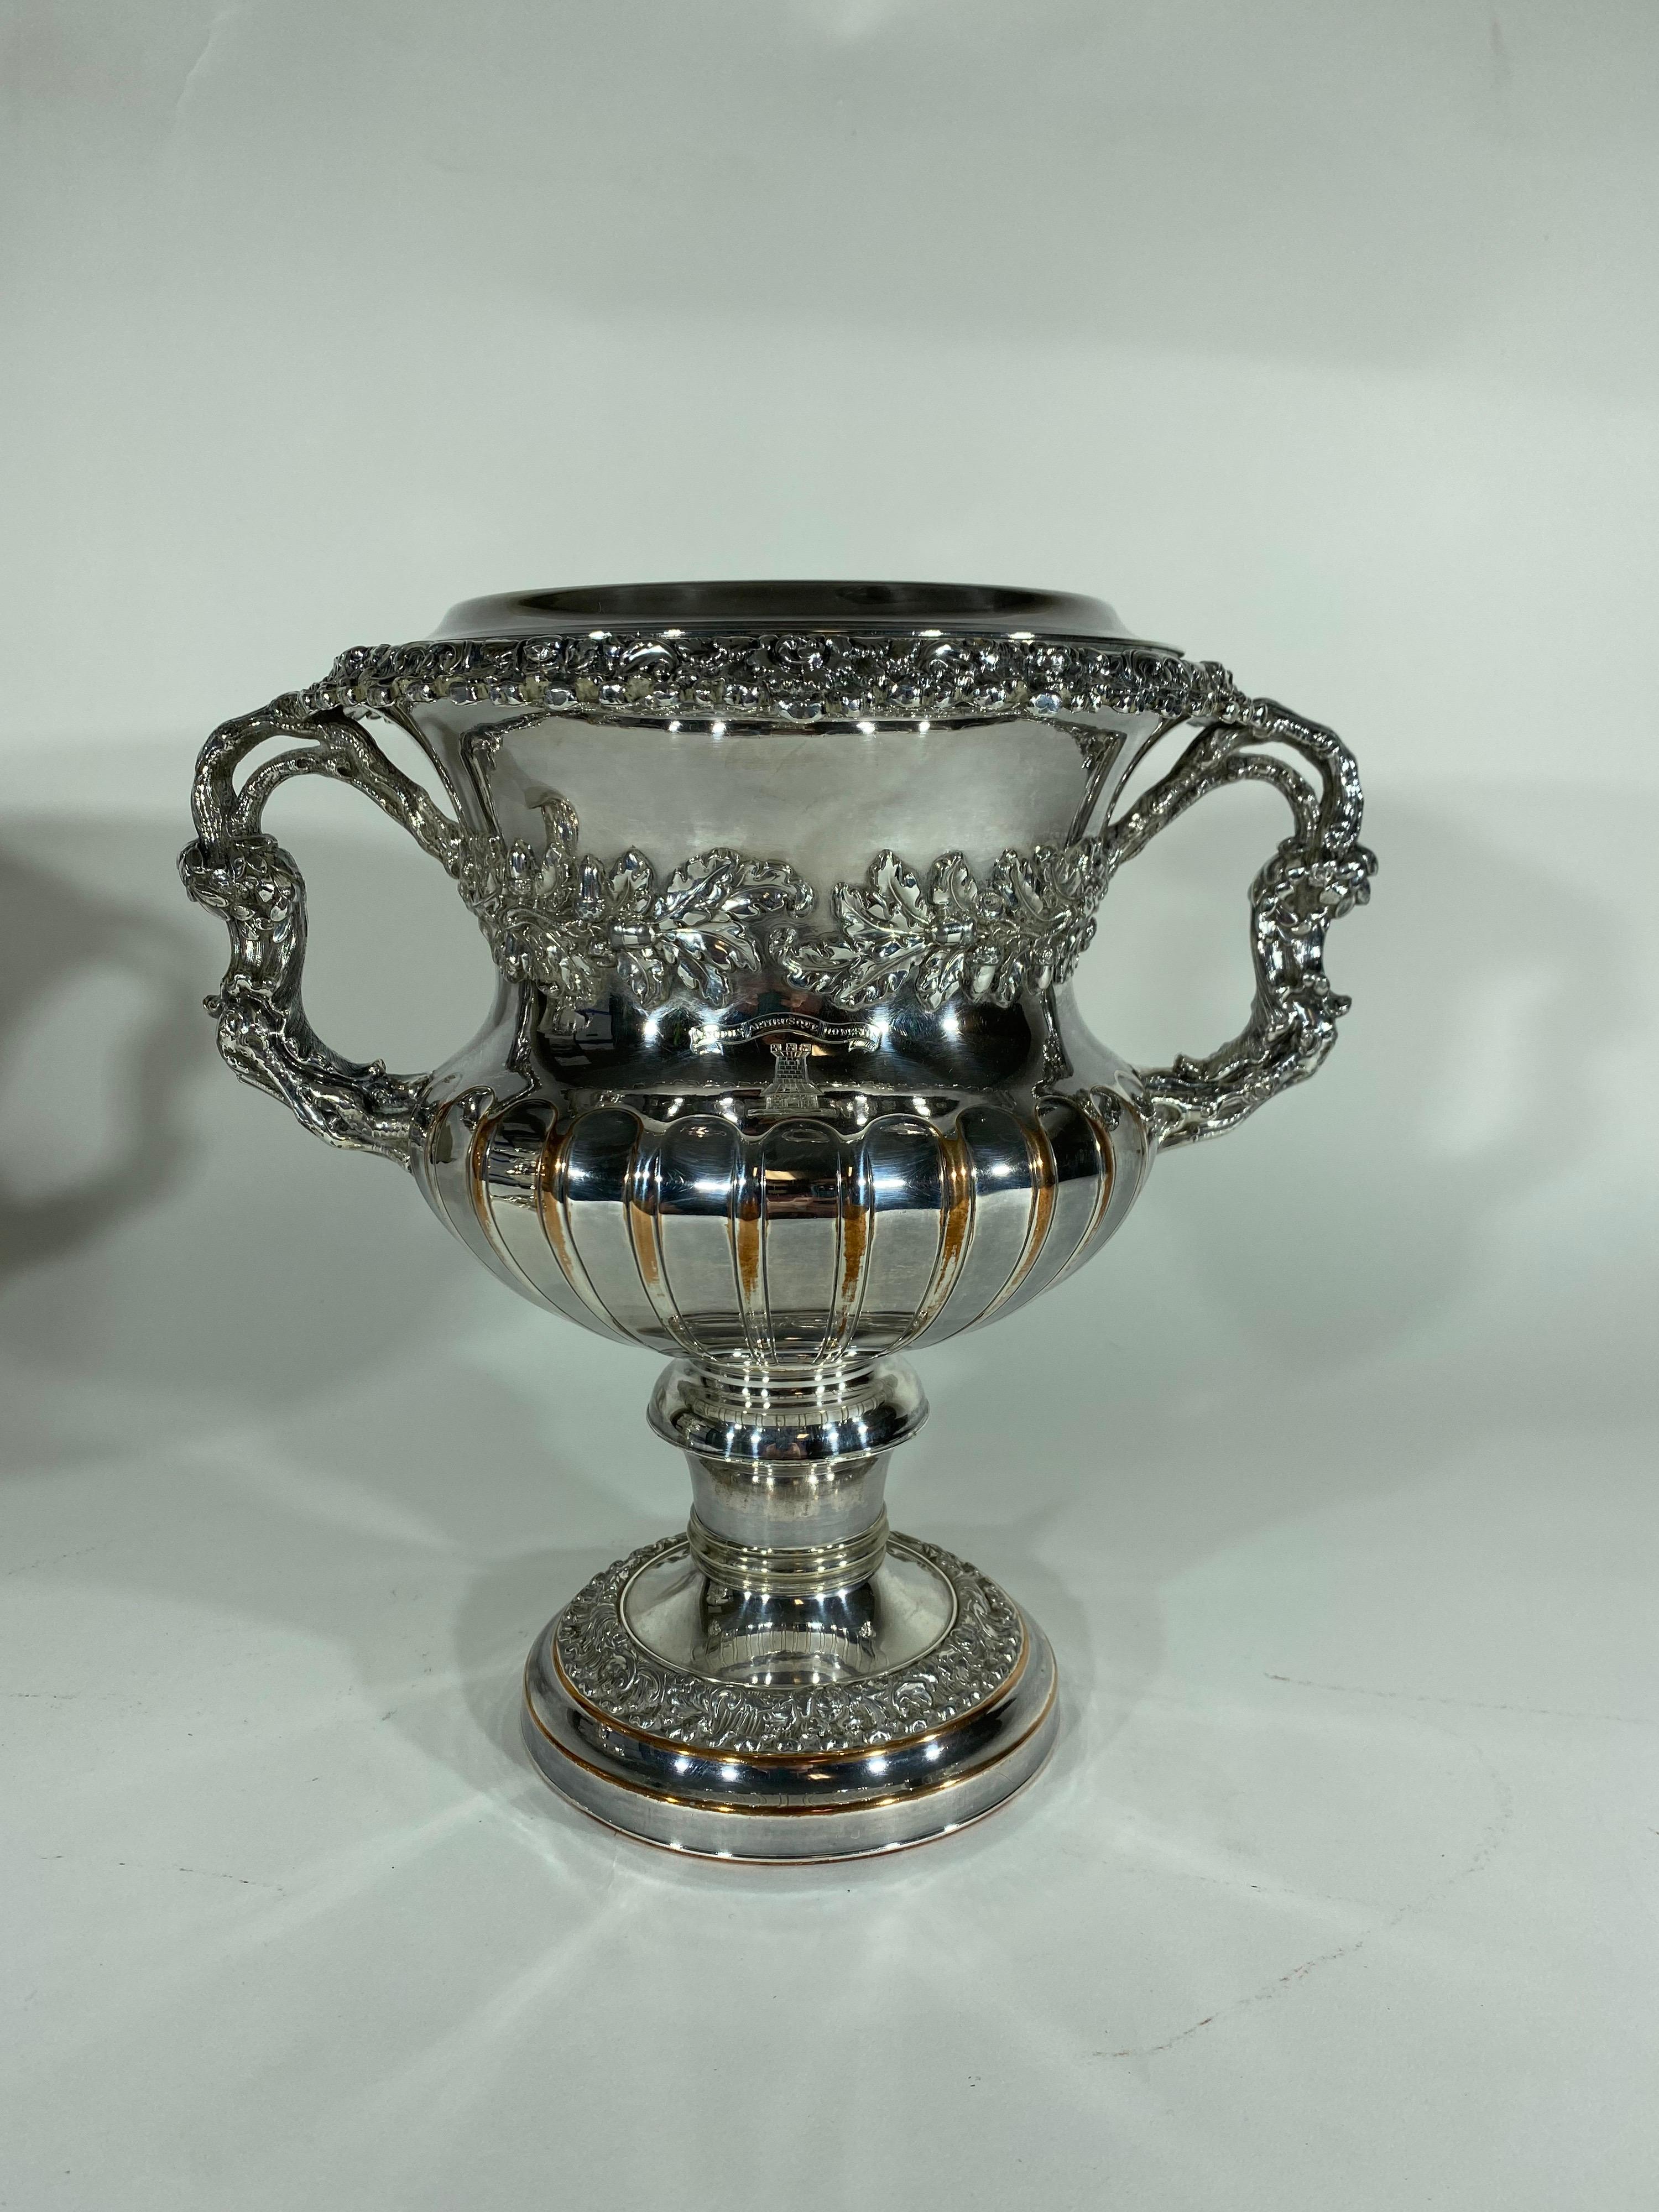 Pair of Sheffield silver over copper wine coolers with amoroso crests. Handled urn form with exceptional casting. Copper showing through on ridges on main body.